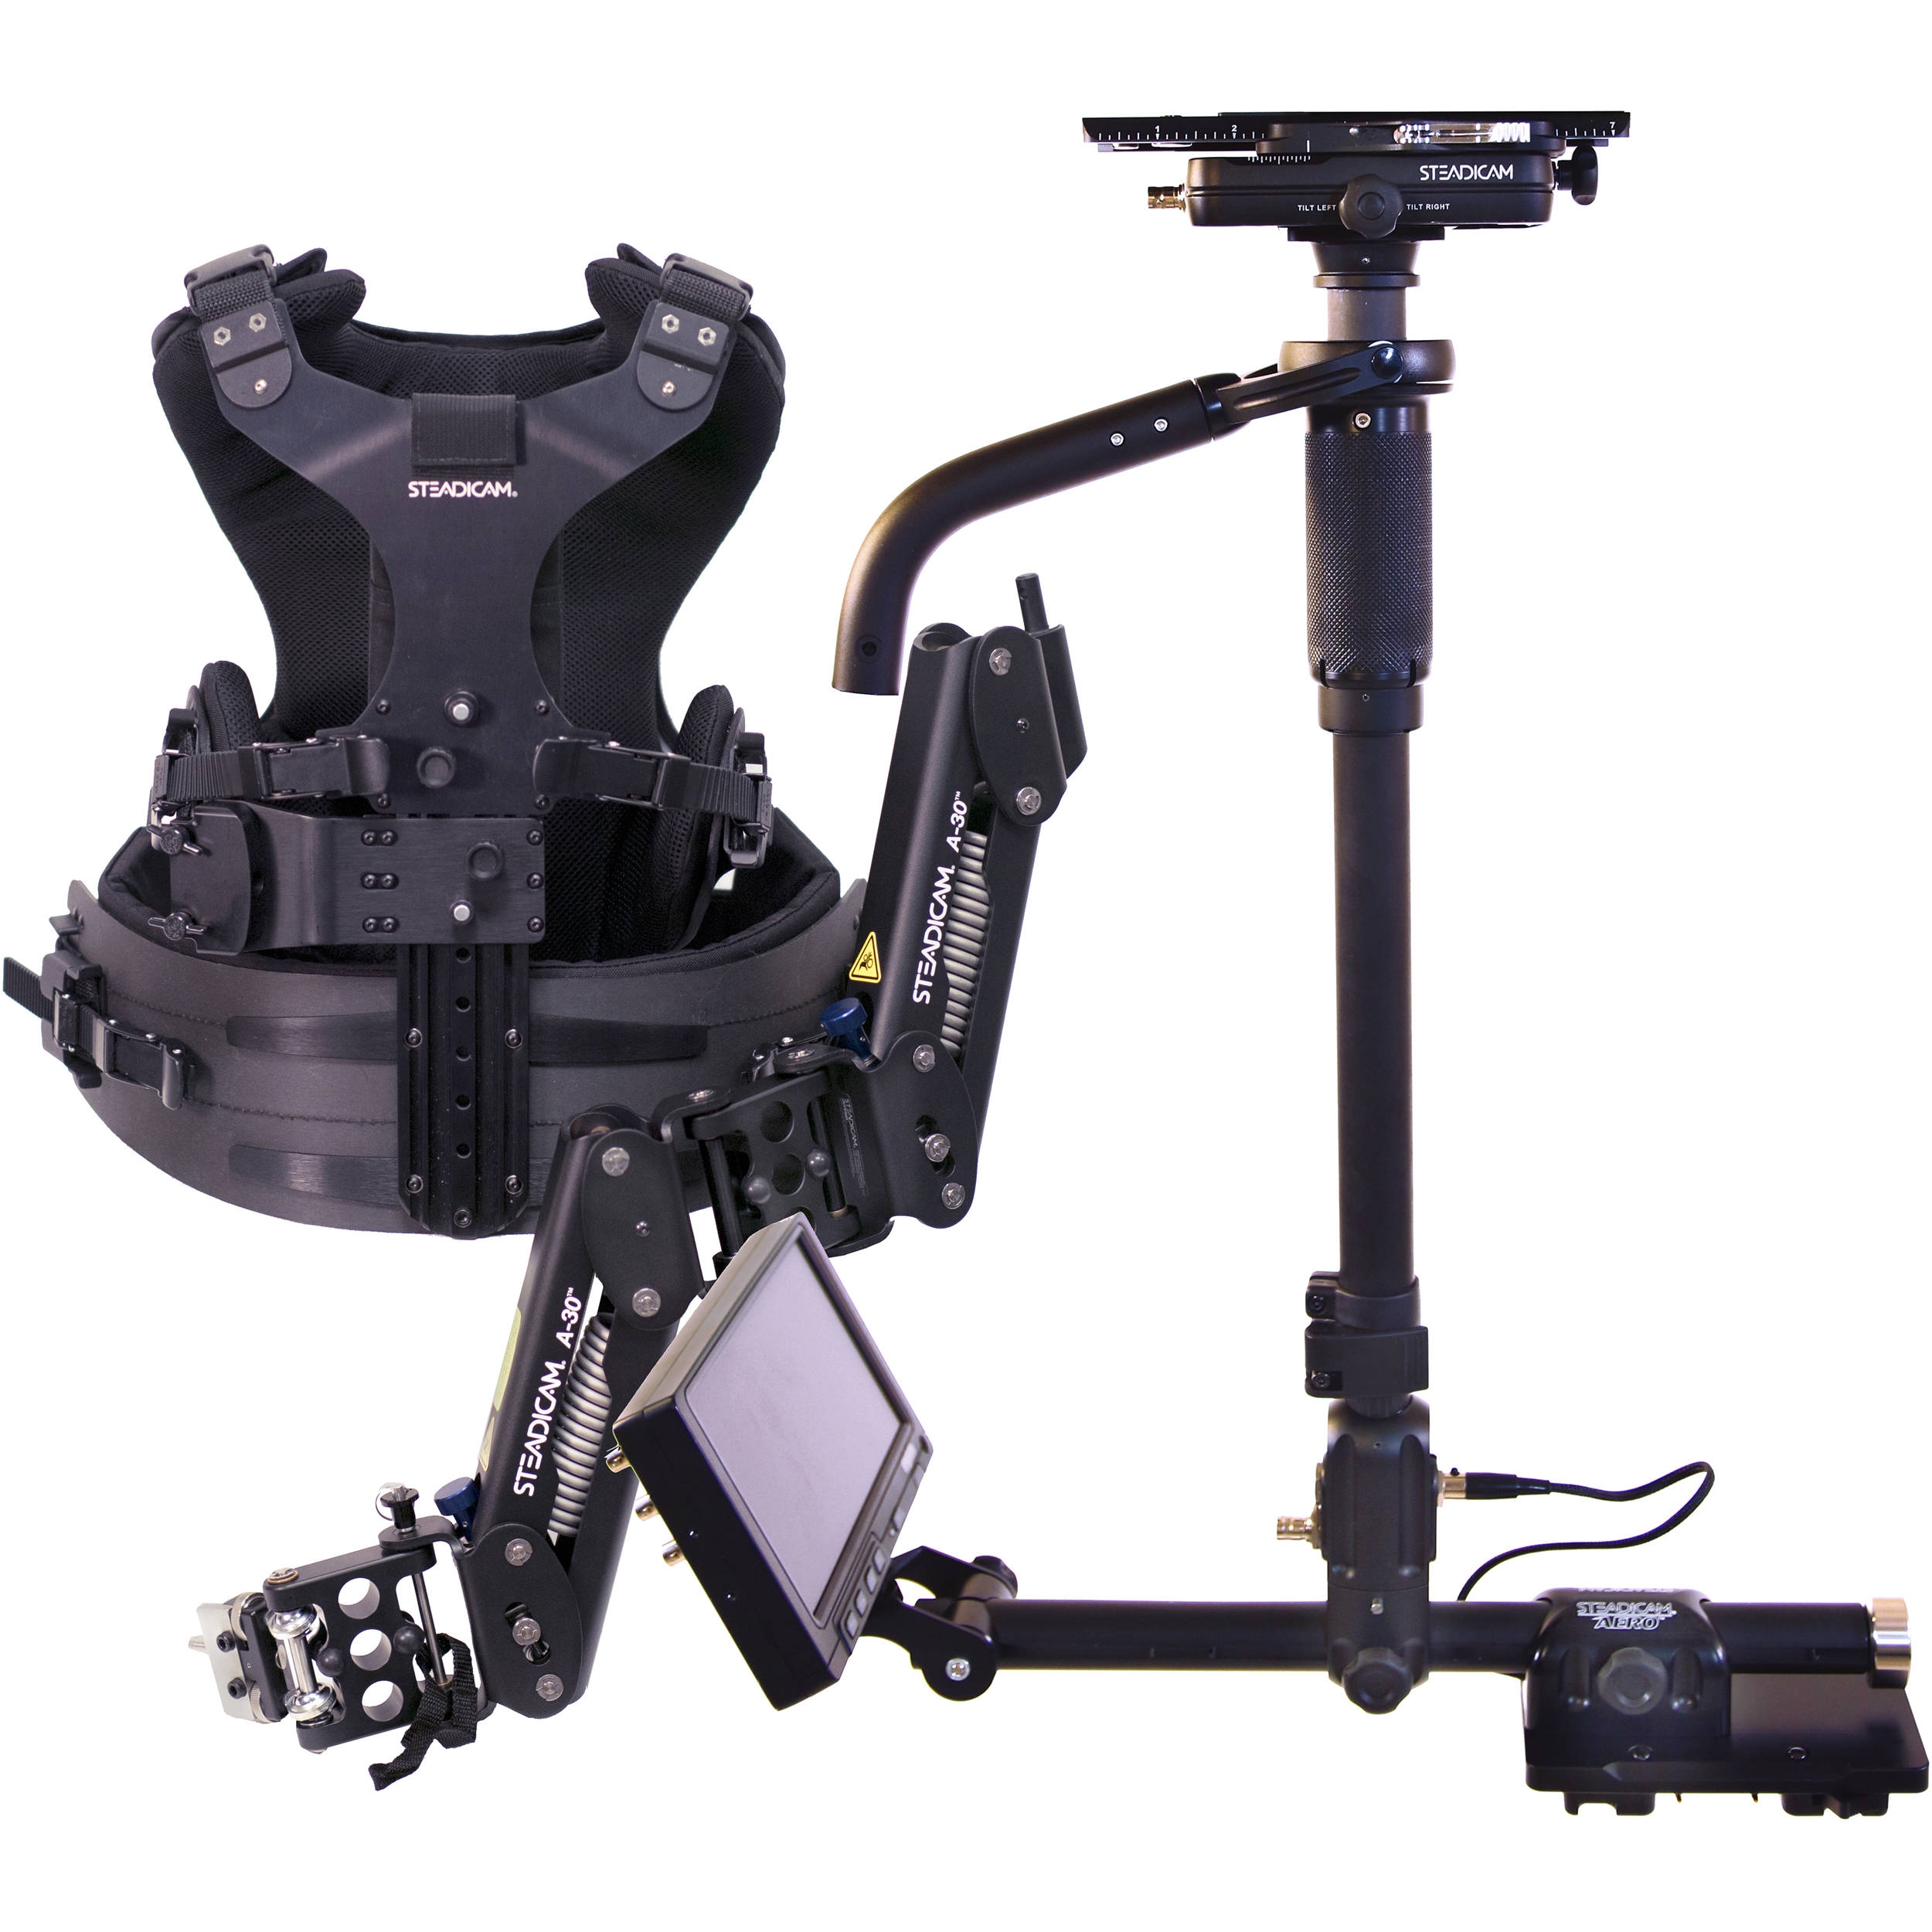 More information about "Steadycam sistema completo"